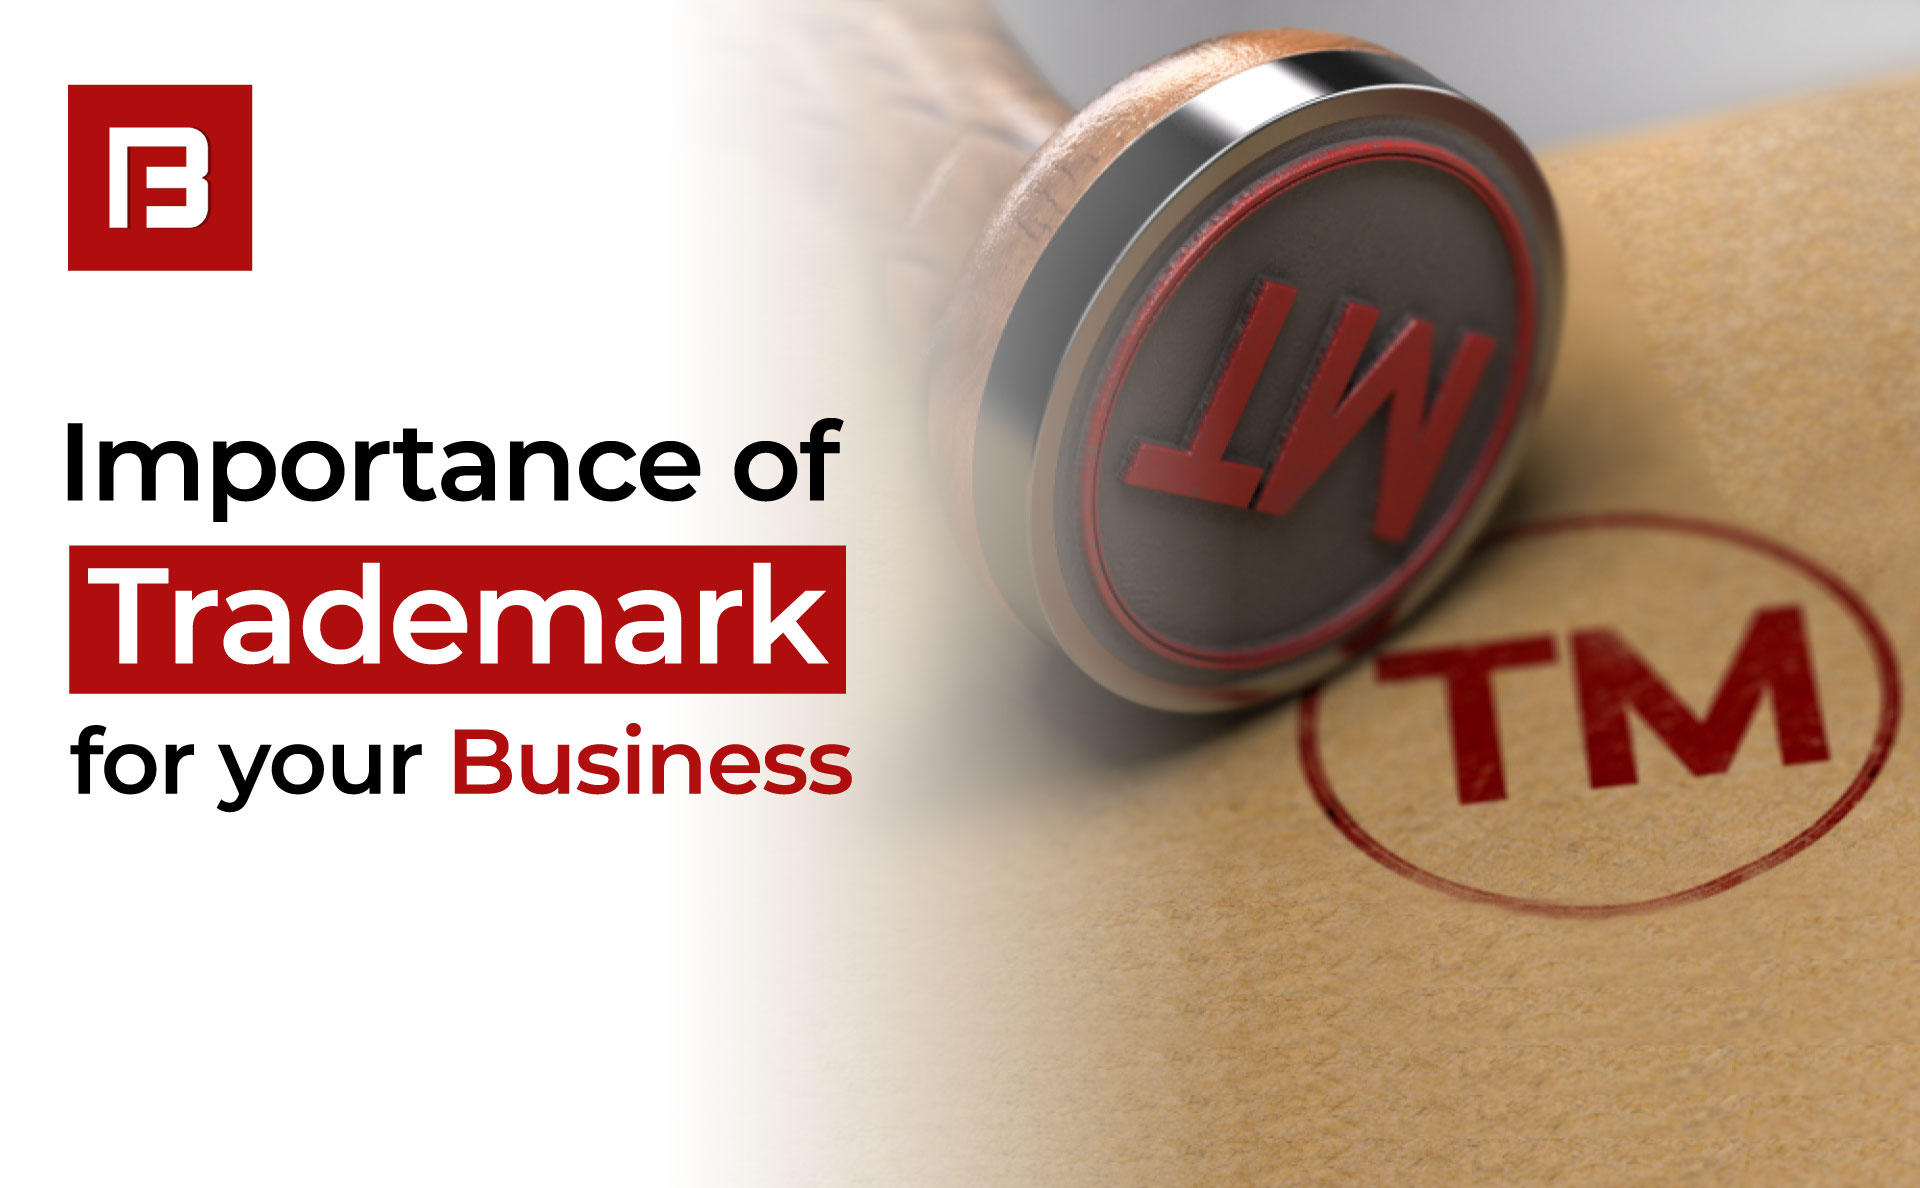 Importance of trademark for your business